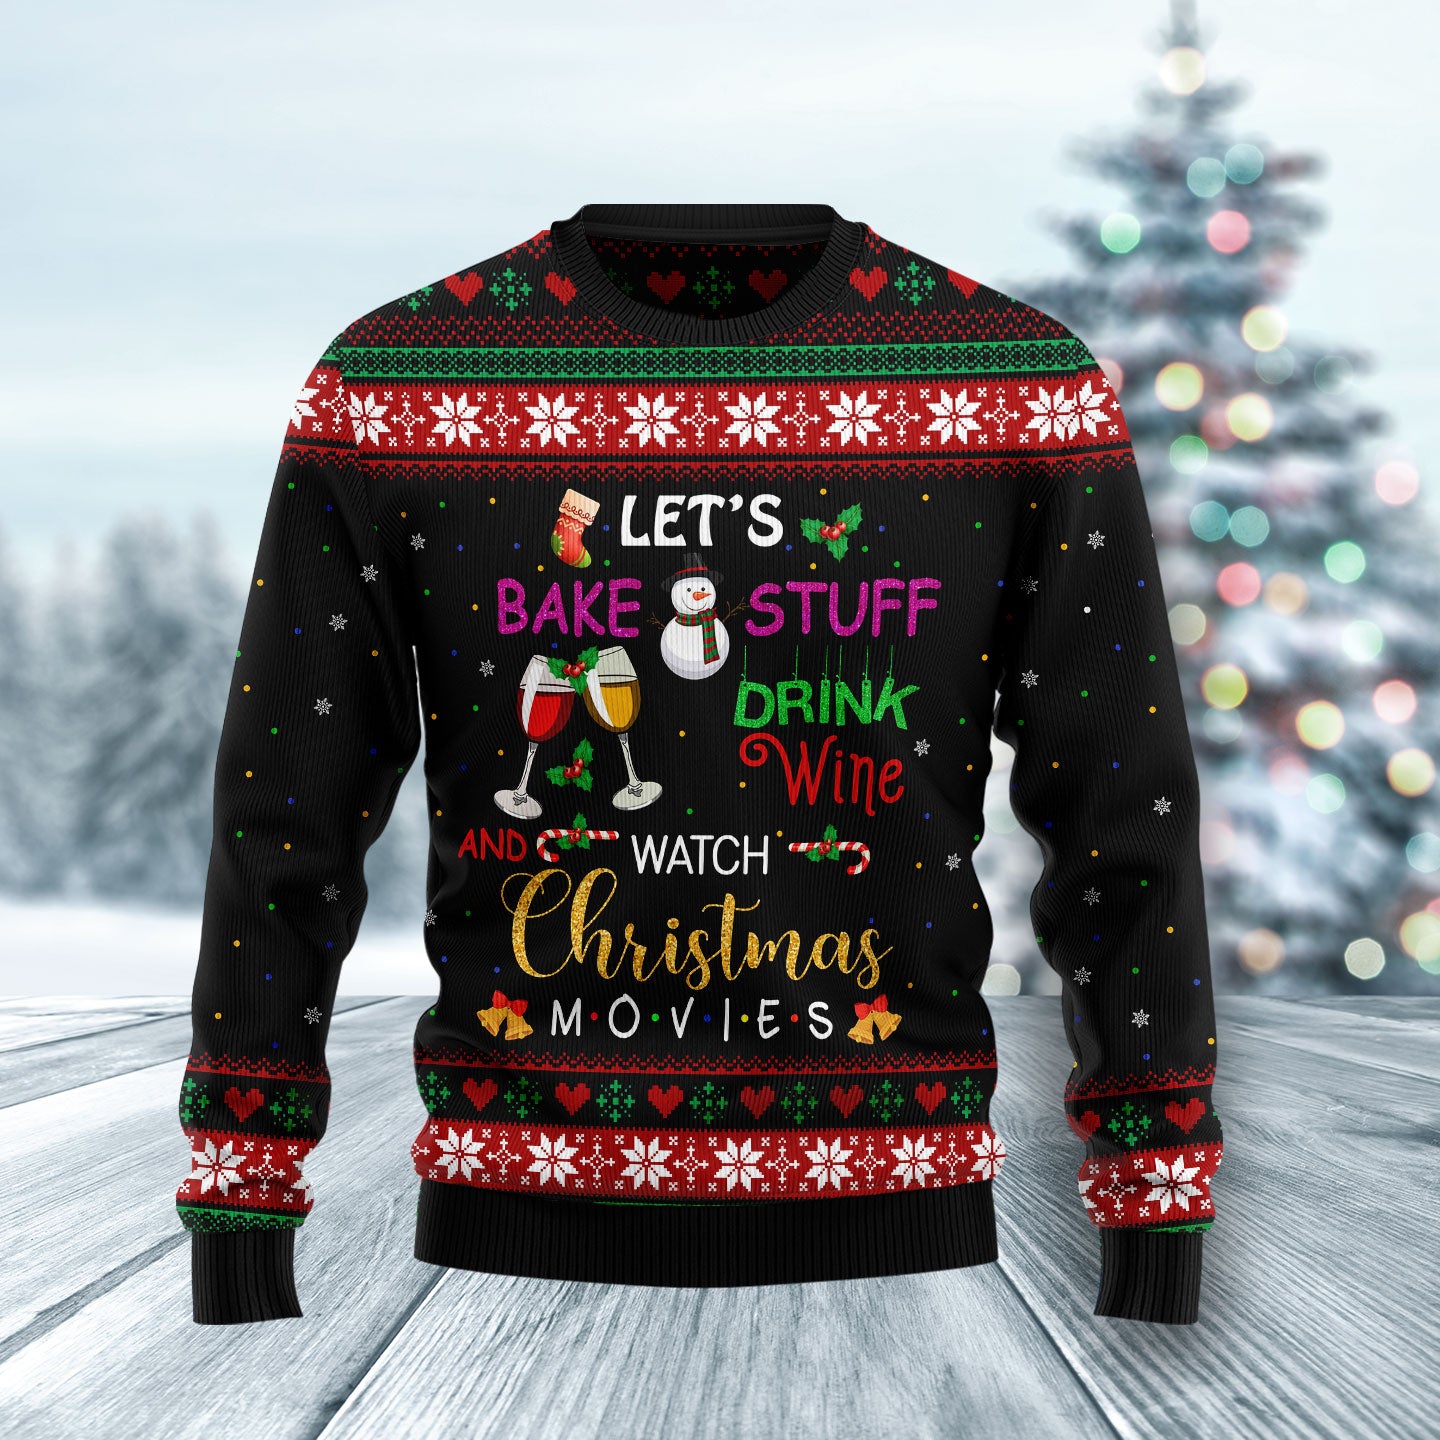 Drink wine and watch christmas movies HZ102802 Ugly Christmas Sweater